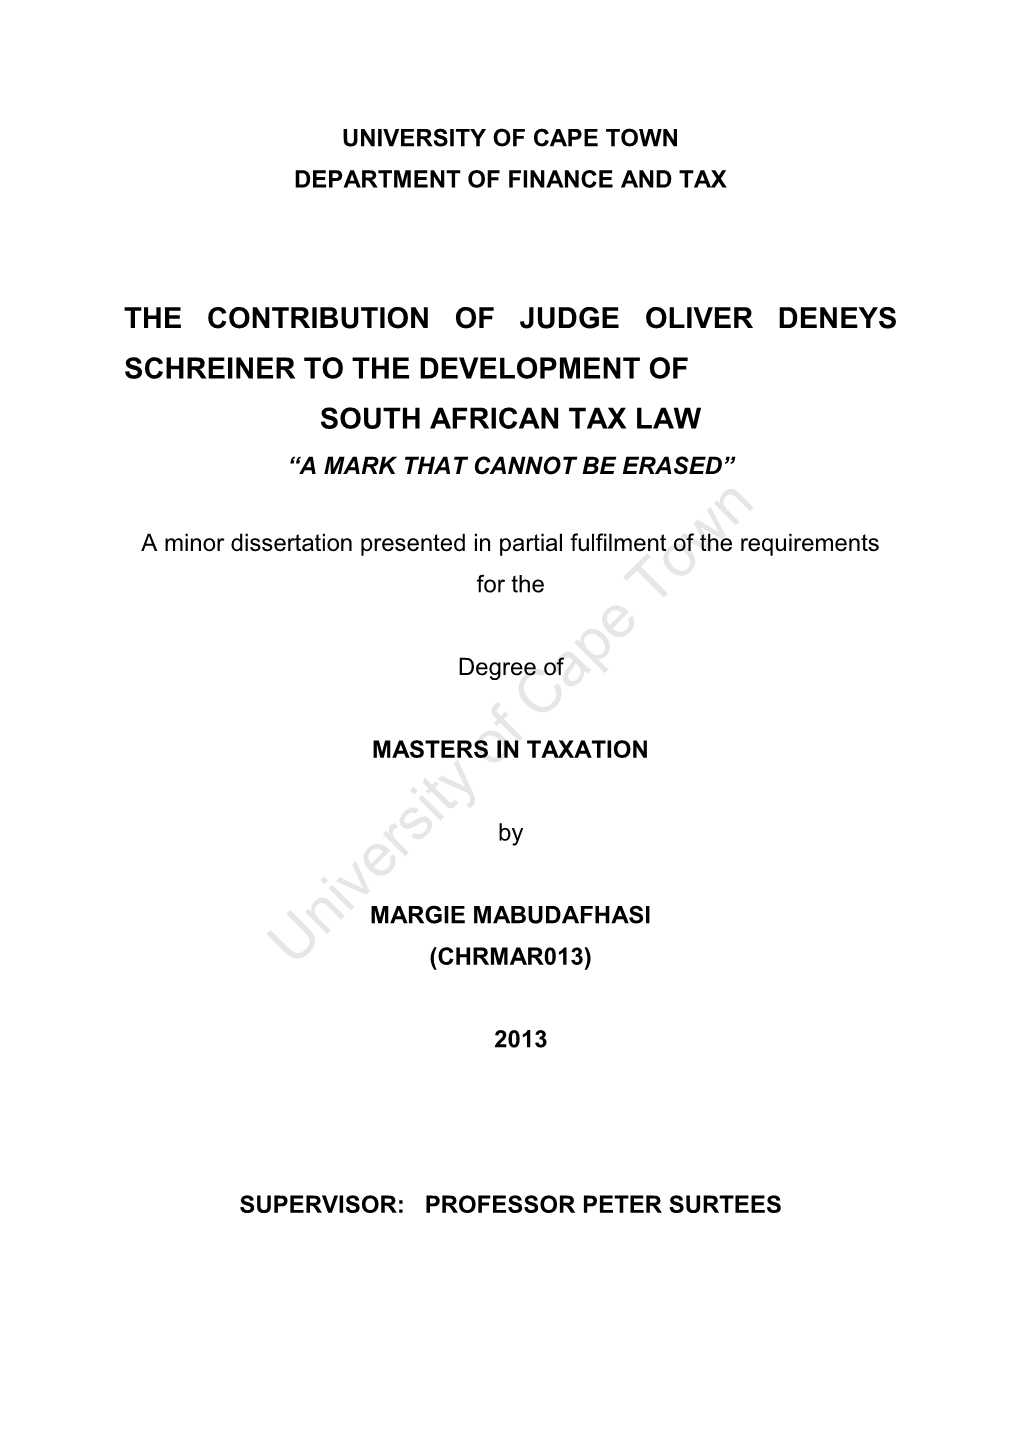 The Contribution of Judge Oliver Deneys Schreiner to the Development of South African Tax Law “A Mark That Cannot Be Erased”